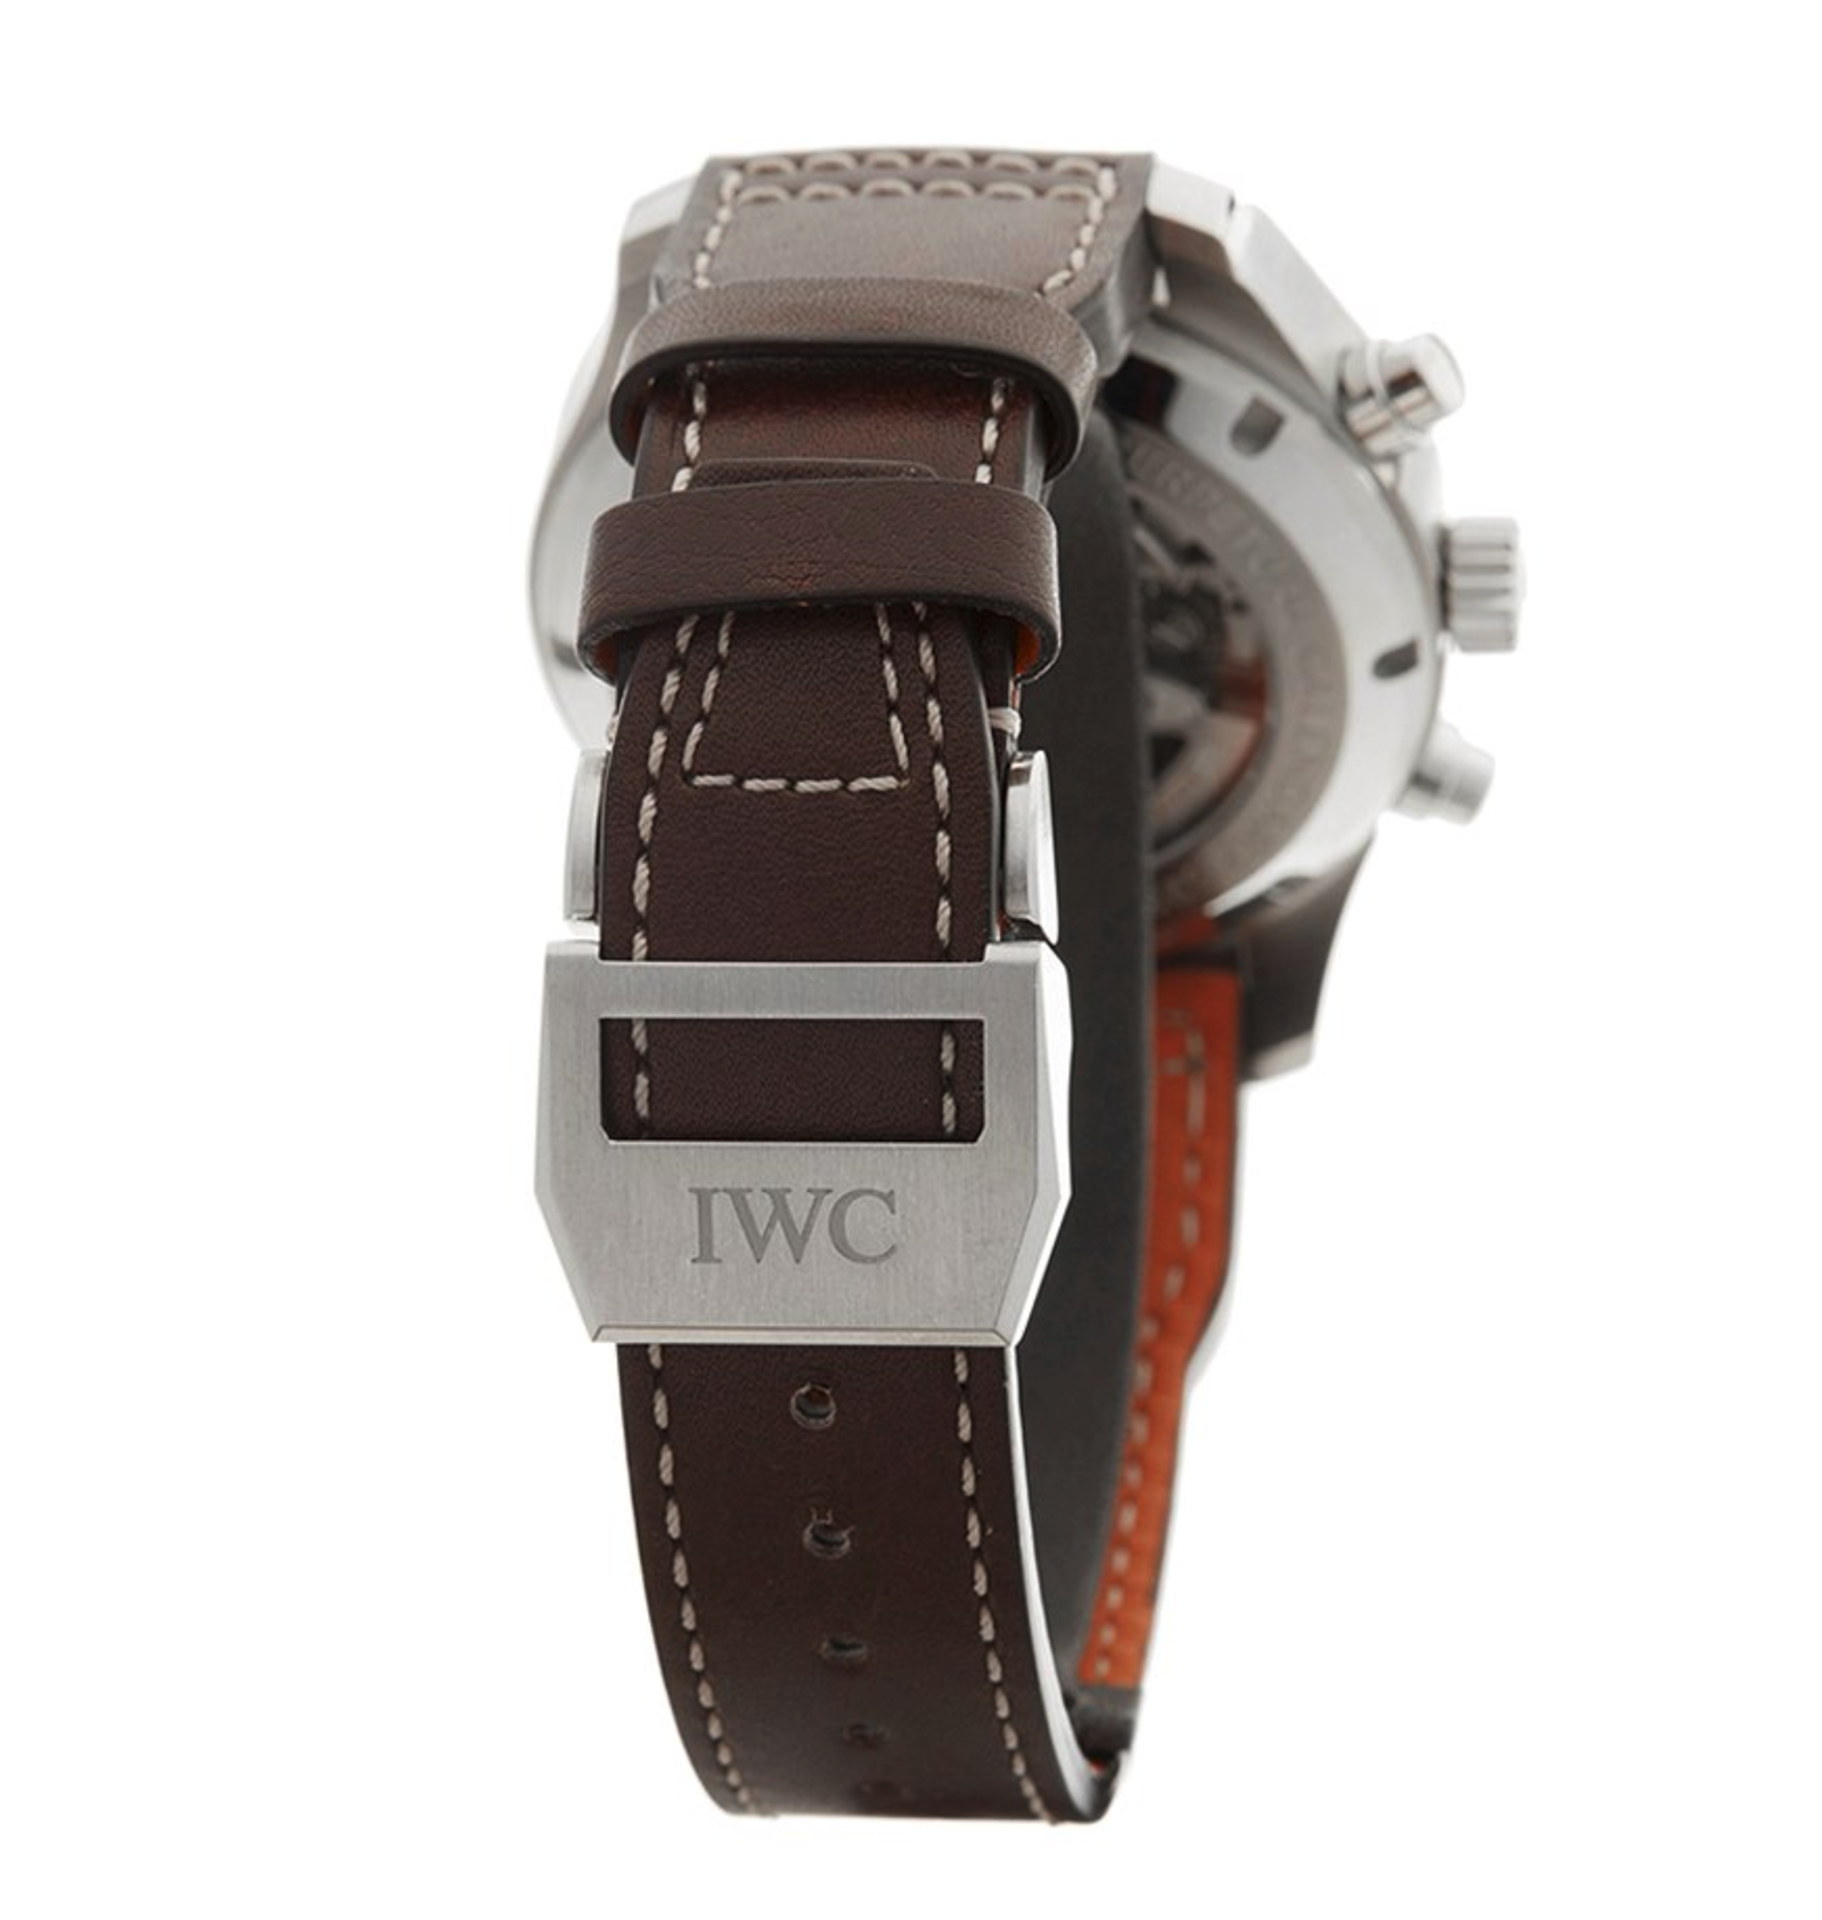 IWC Pilot's Perpetual Calendar 46mm Stainless Steel - IW379108 - Image 4 of 8